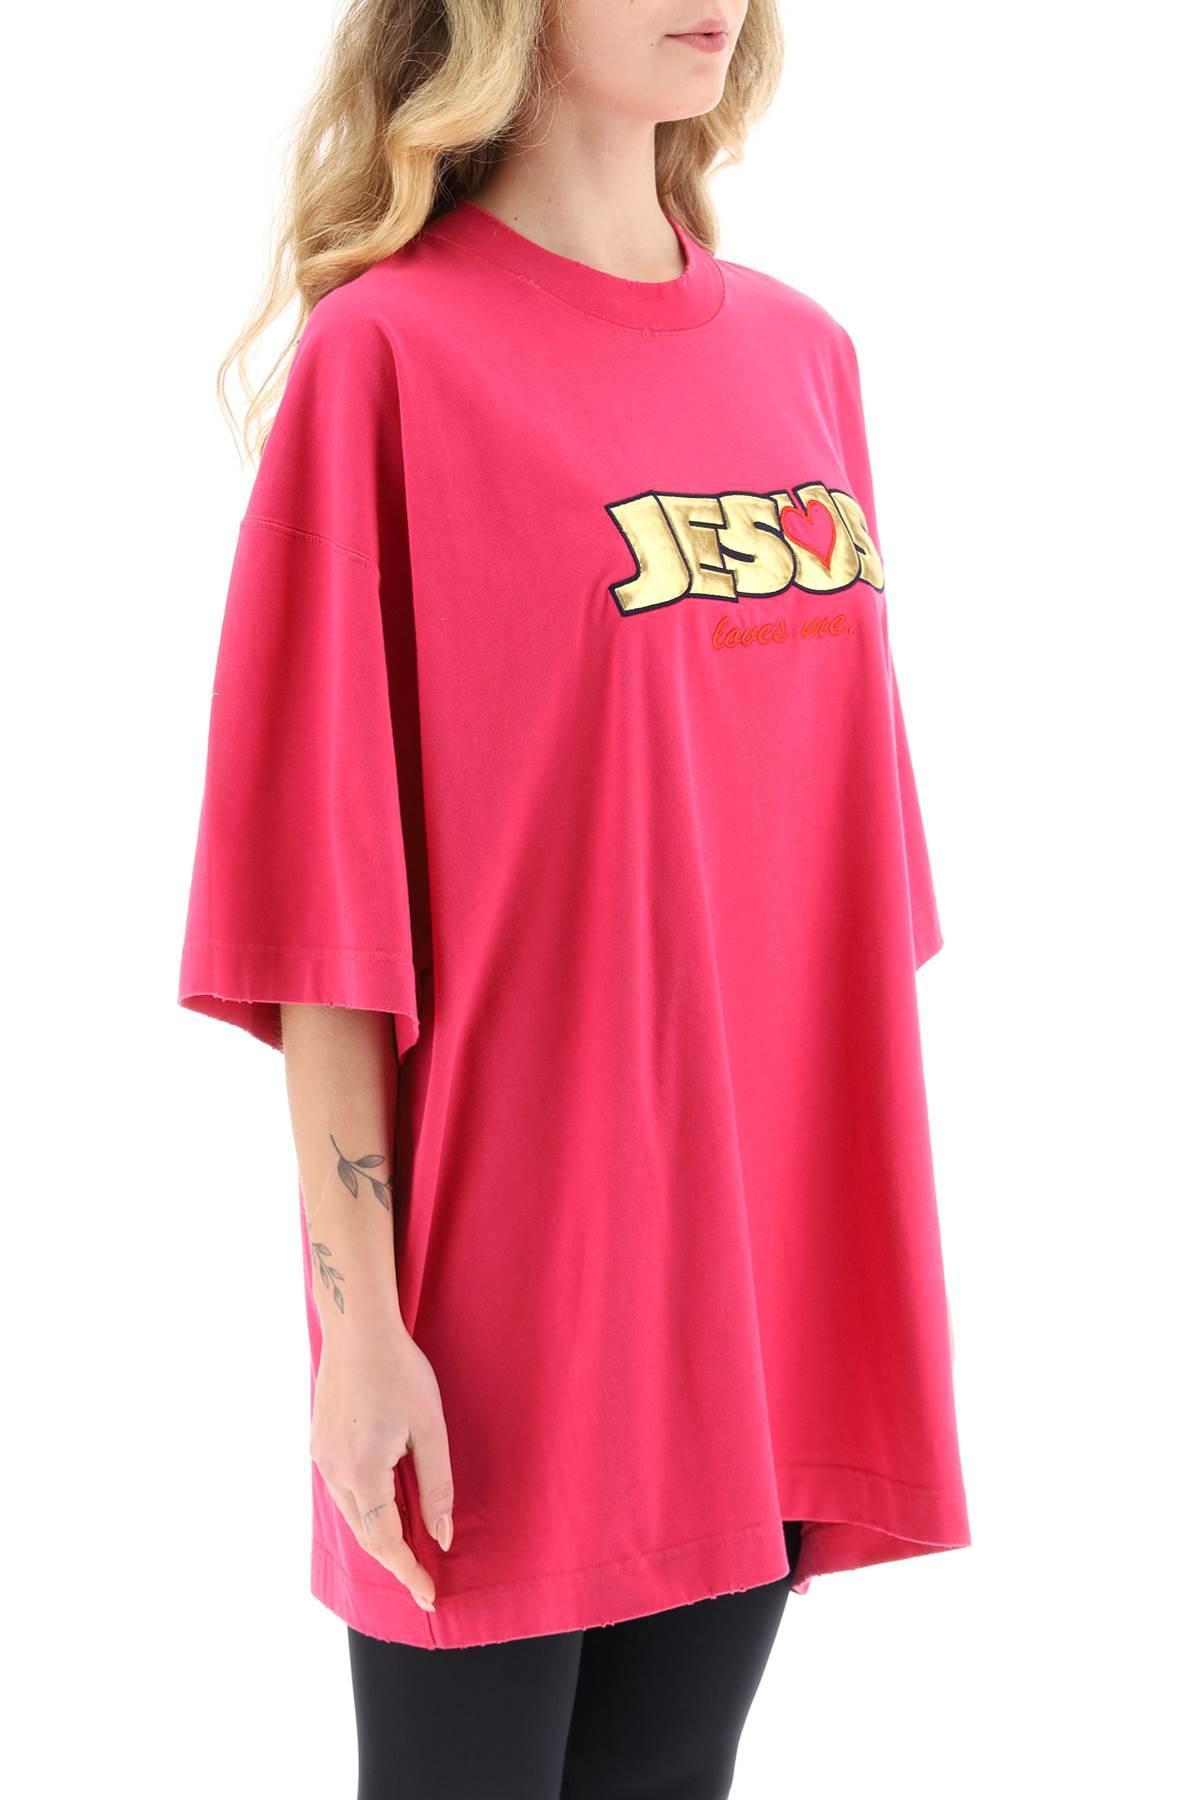 Vetements 'jesus Loves You' Oversized T-shirt in Pink | Lyst